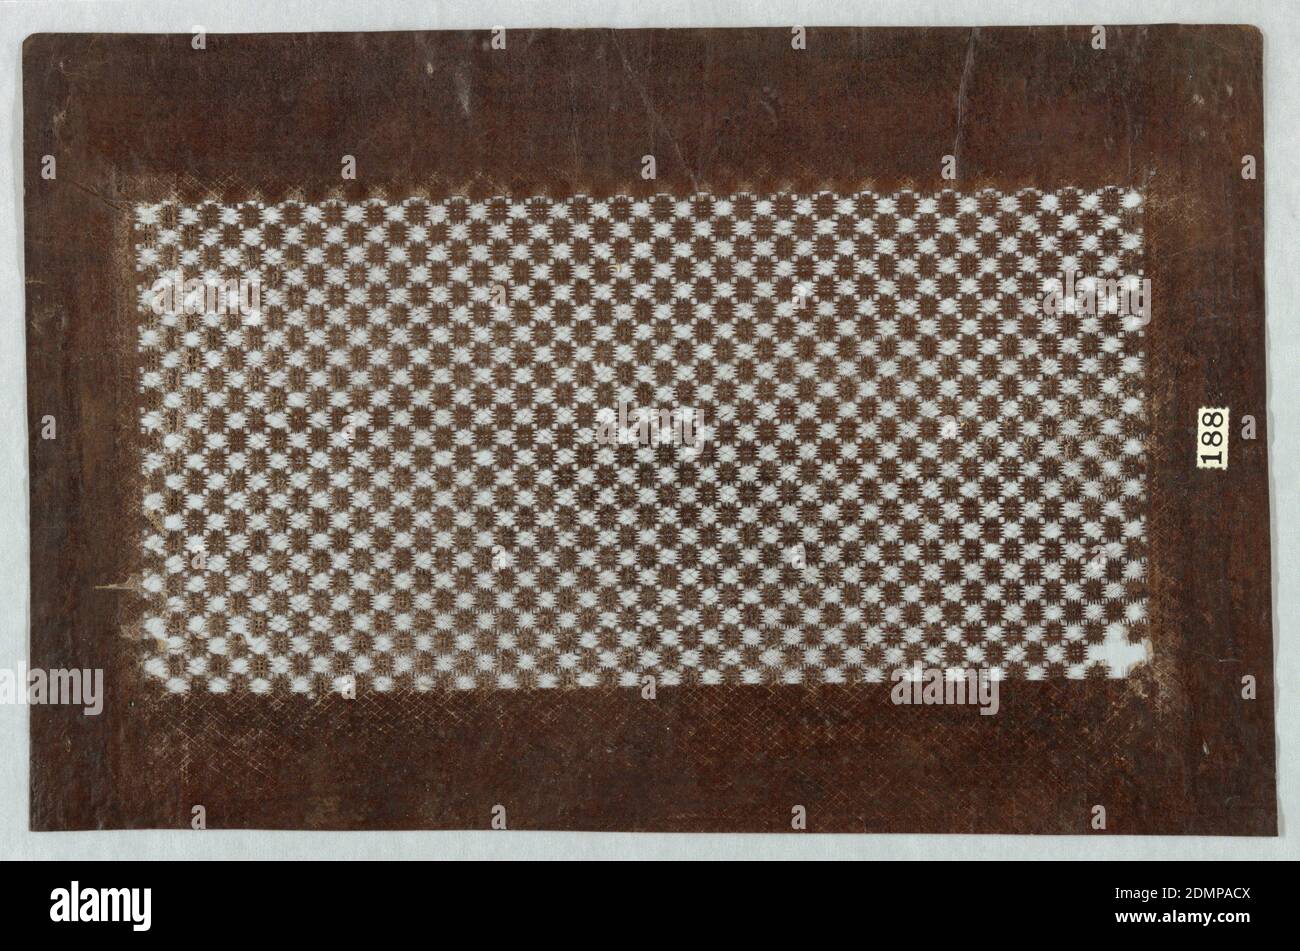 Crosshatching Motif, Mulberry paper (kozo washi) treated with fermented persimmon tannin (kakishibu), and silk threads (itoire), A repeated crosshatching design in the form of a checkered board creates this geometric motif. The top left corner is damaged. The overall condition of this stencil appears to be worn down., Japan, mid 18th - early 19th century, textile designs, Katagami, Katagami Stock Photo